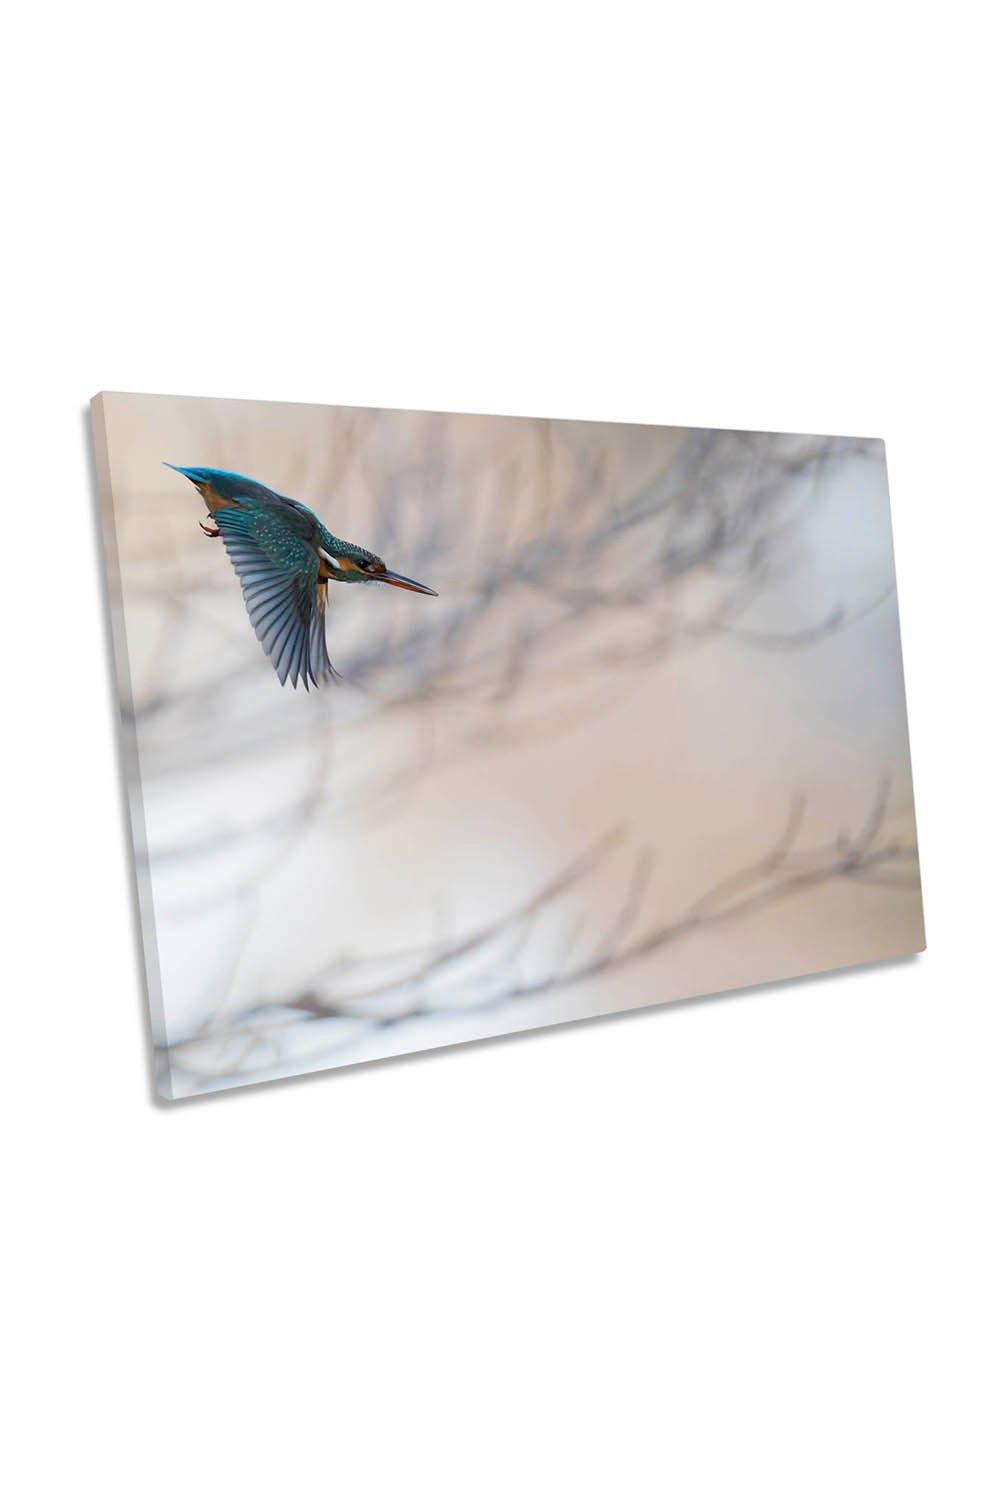 Kingfisher Bird in Action Nature Canvas Wall Art Picture Print